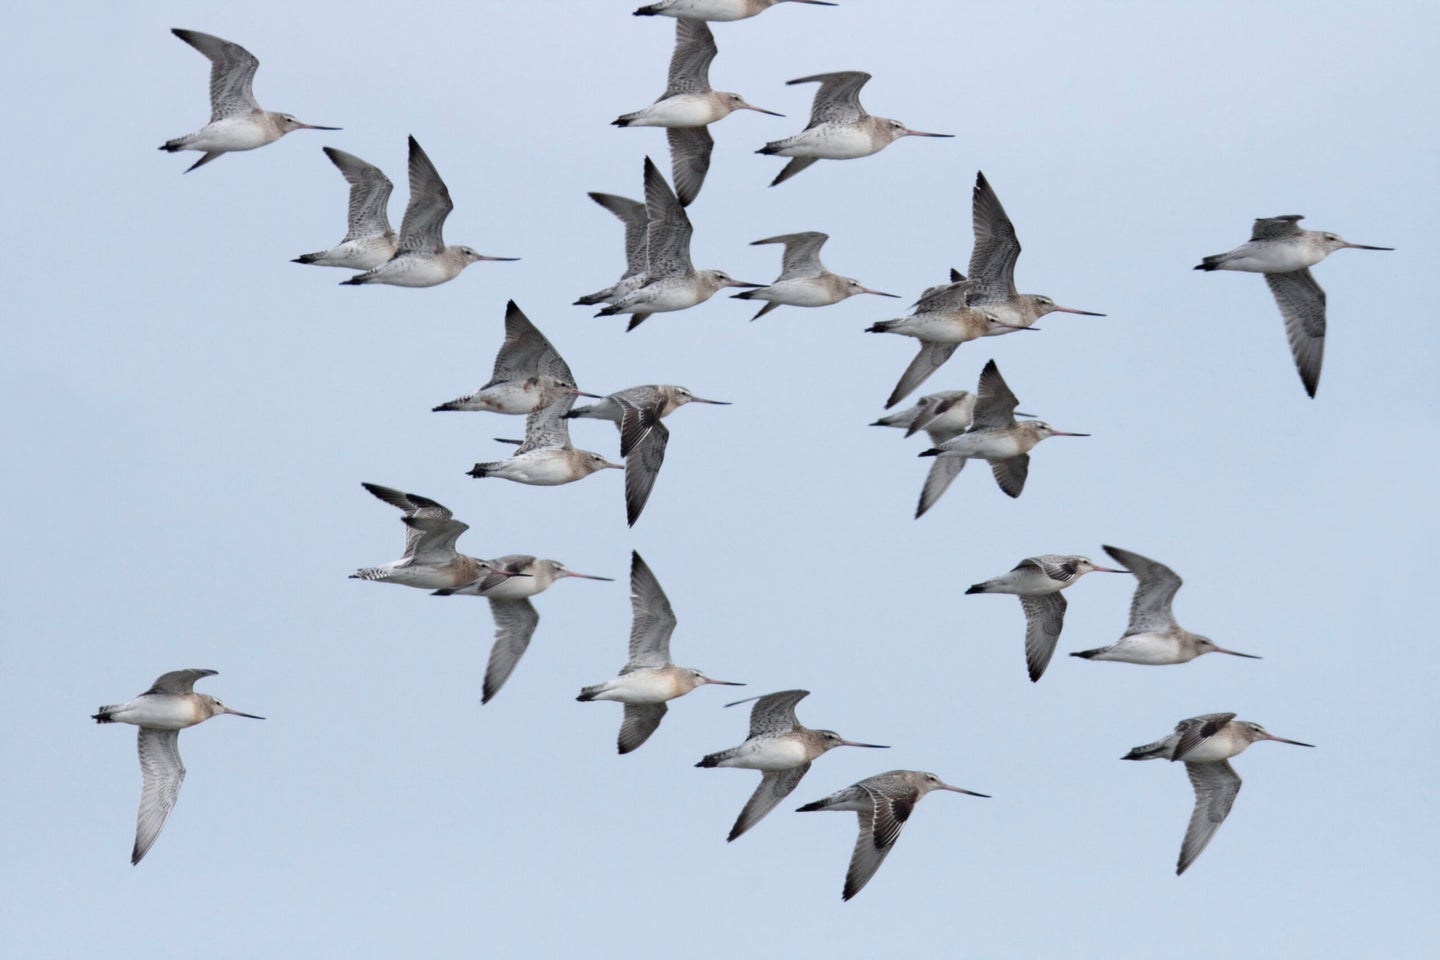 Bar-tailed Godwits in flight